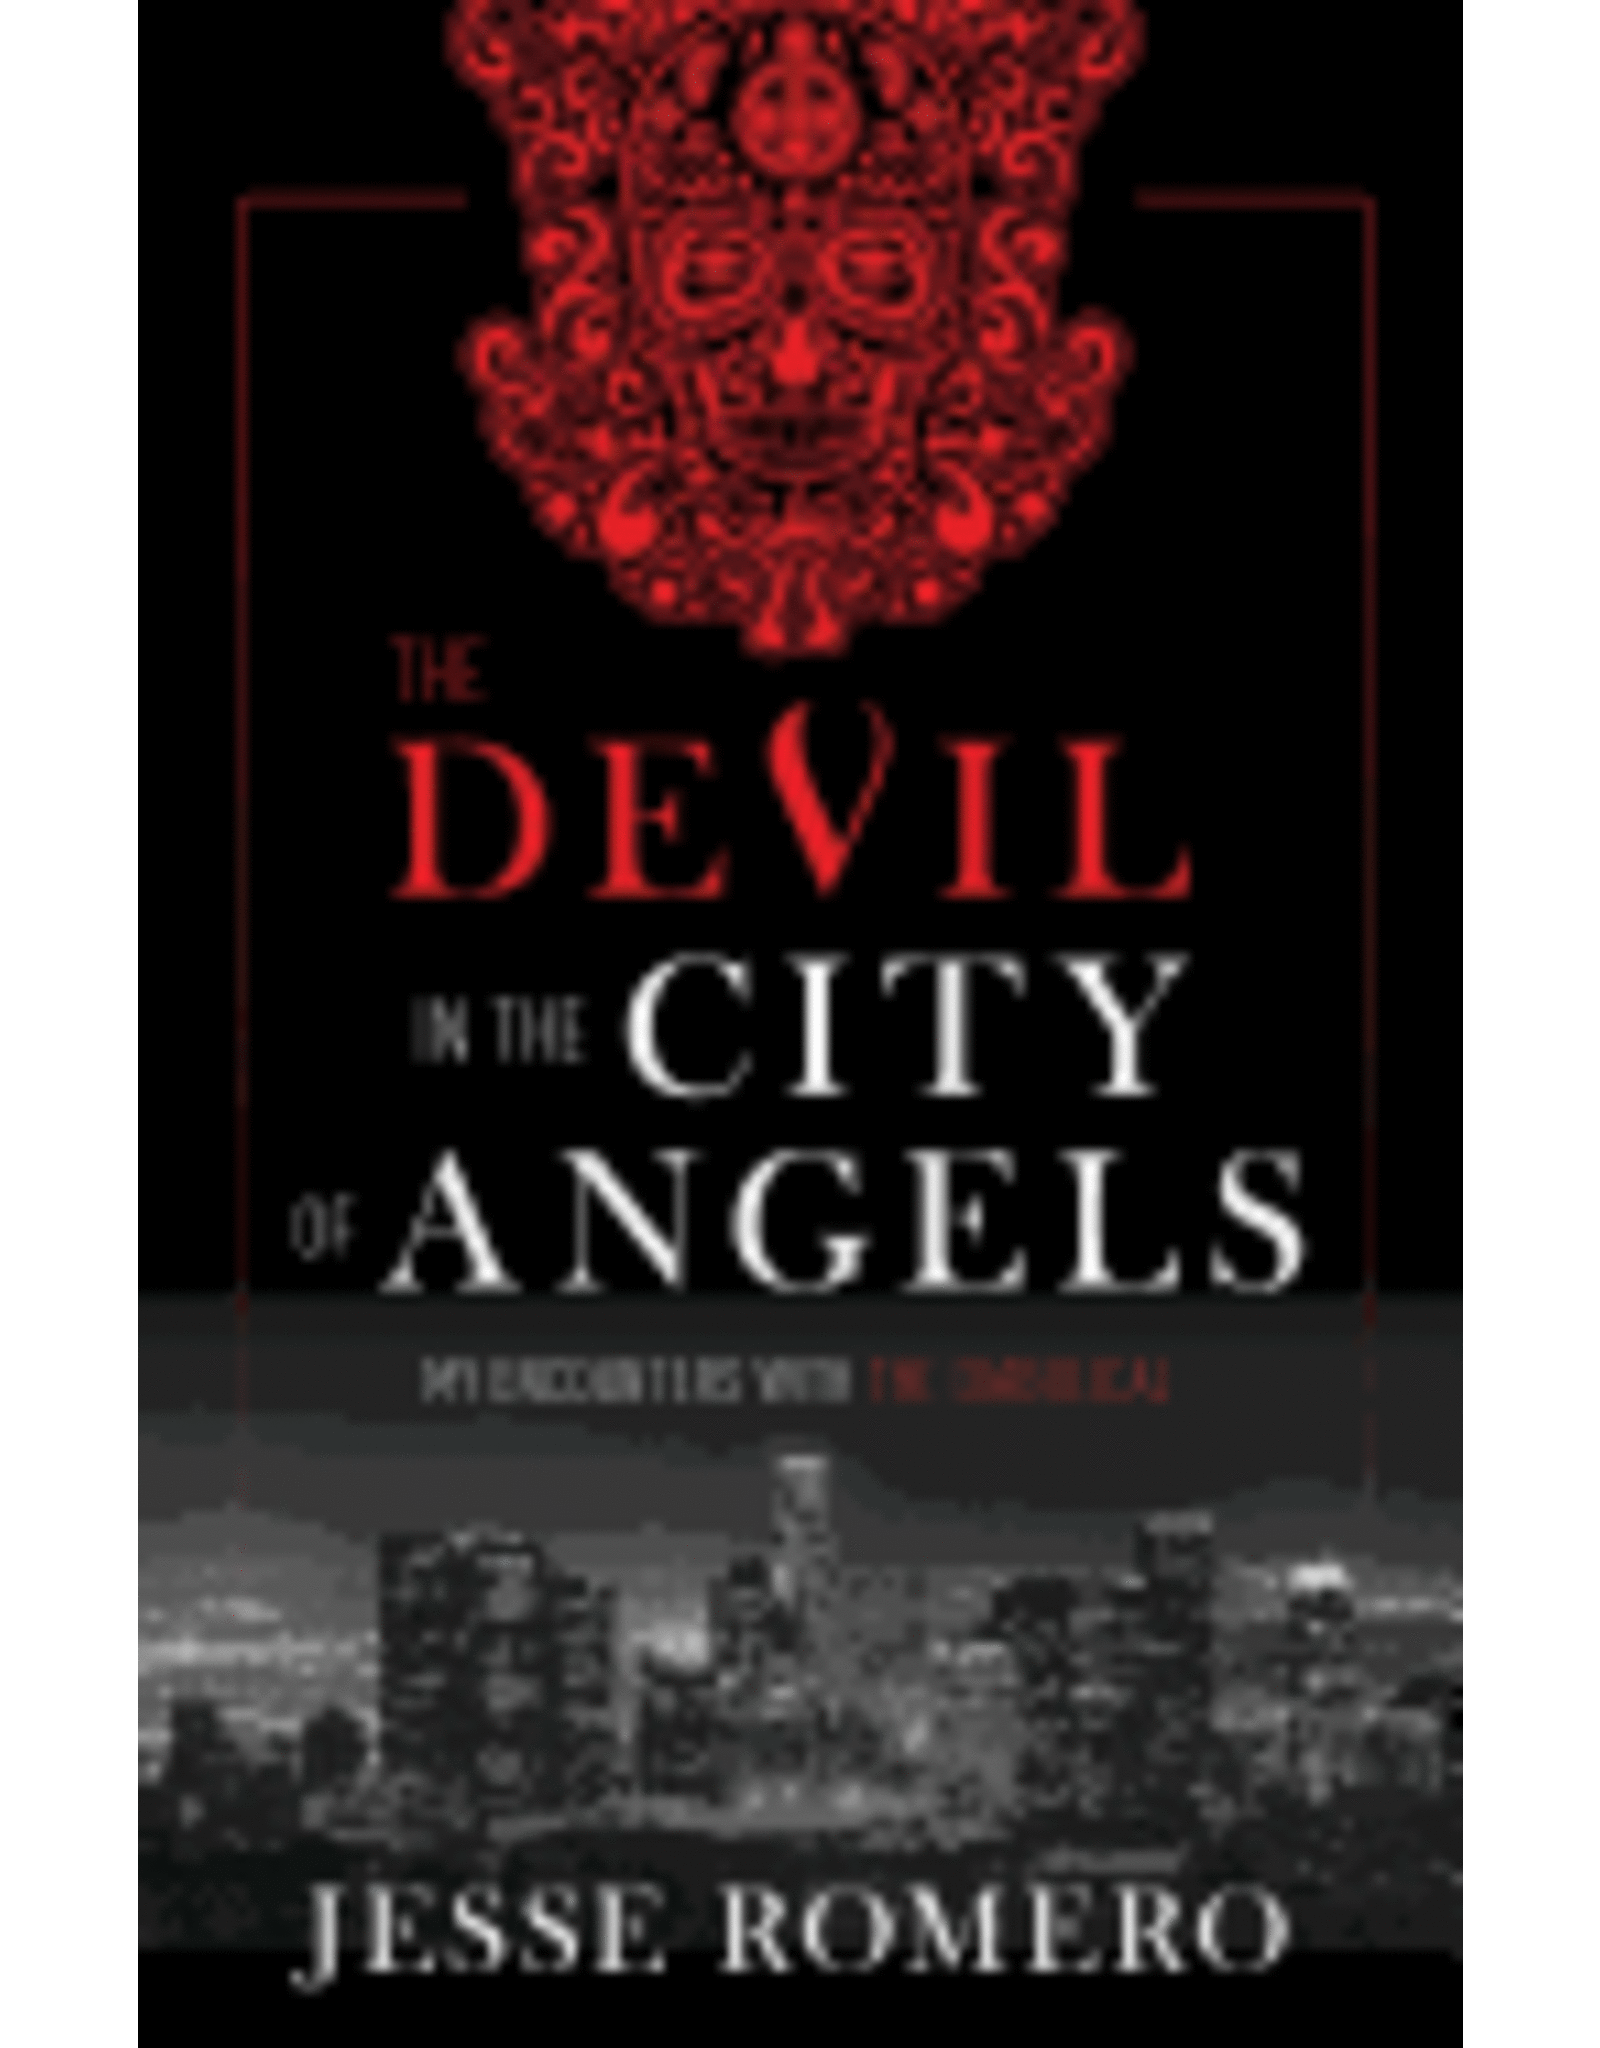 The Devil in the City of Angels: My Encounters with the Diabolical